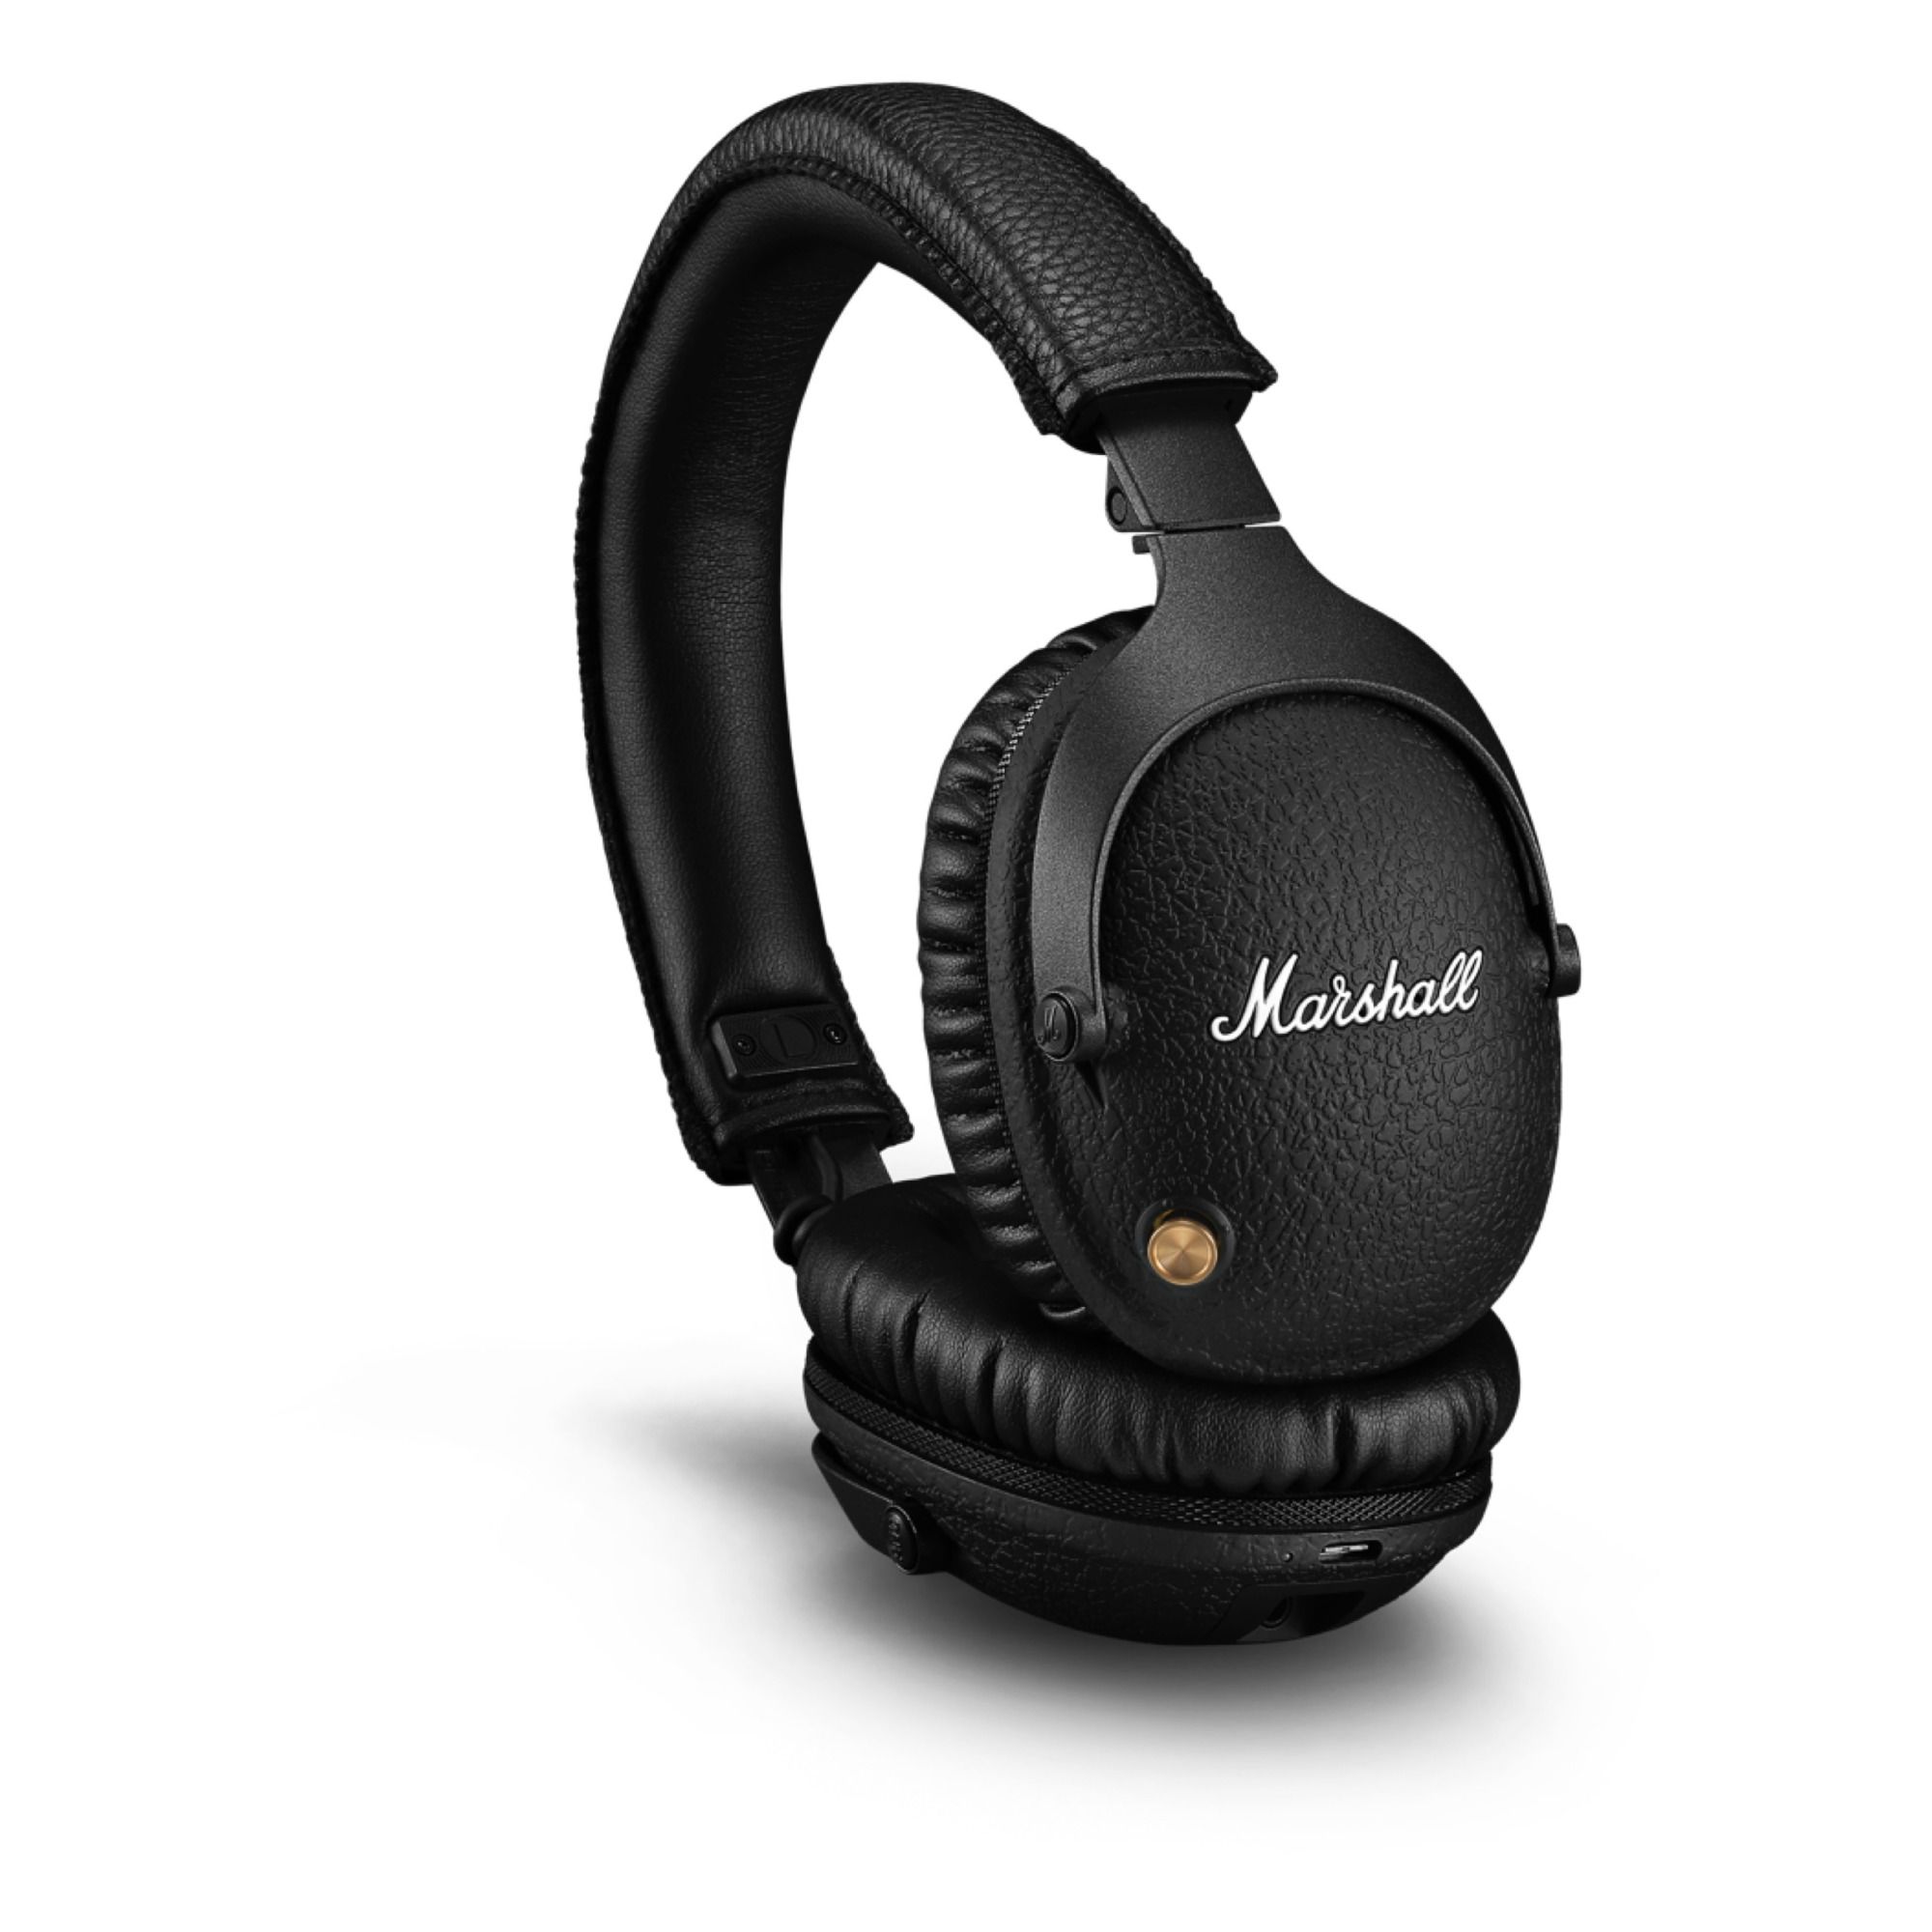 Marshall - Casque Monitor 2 Bluetooth - Fille - Noir